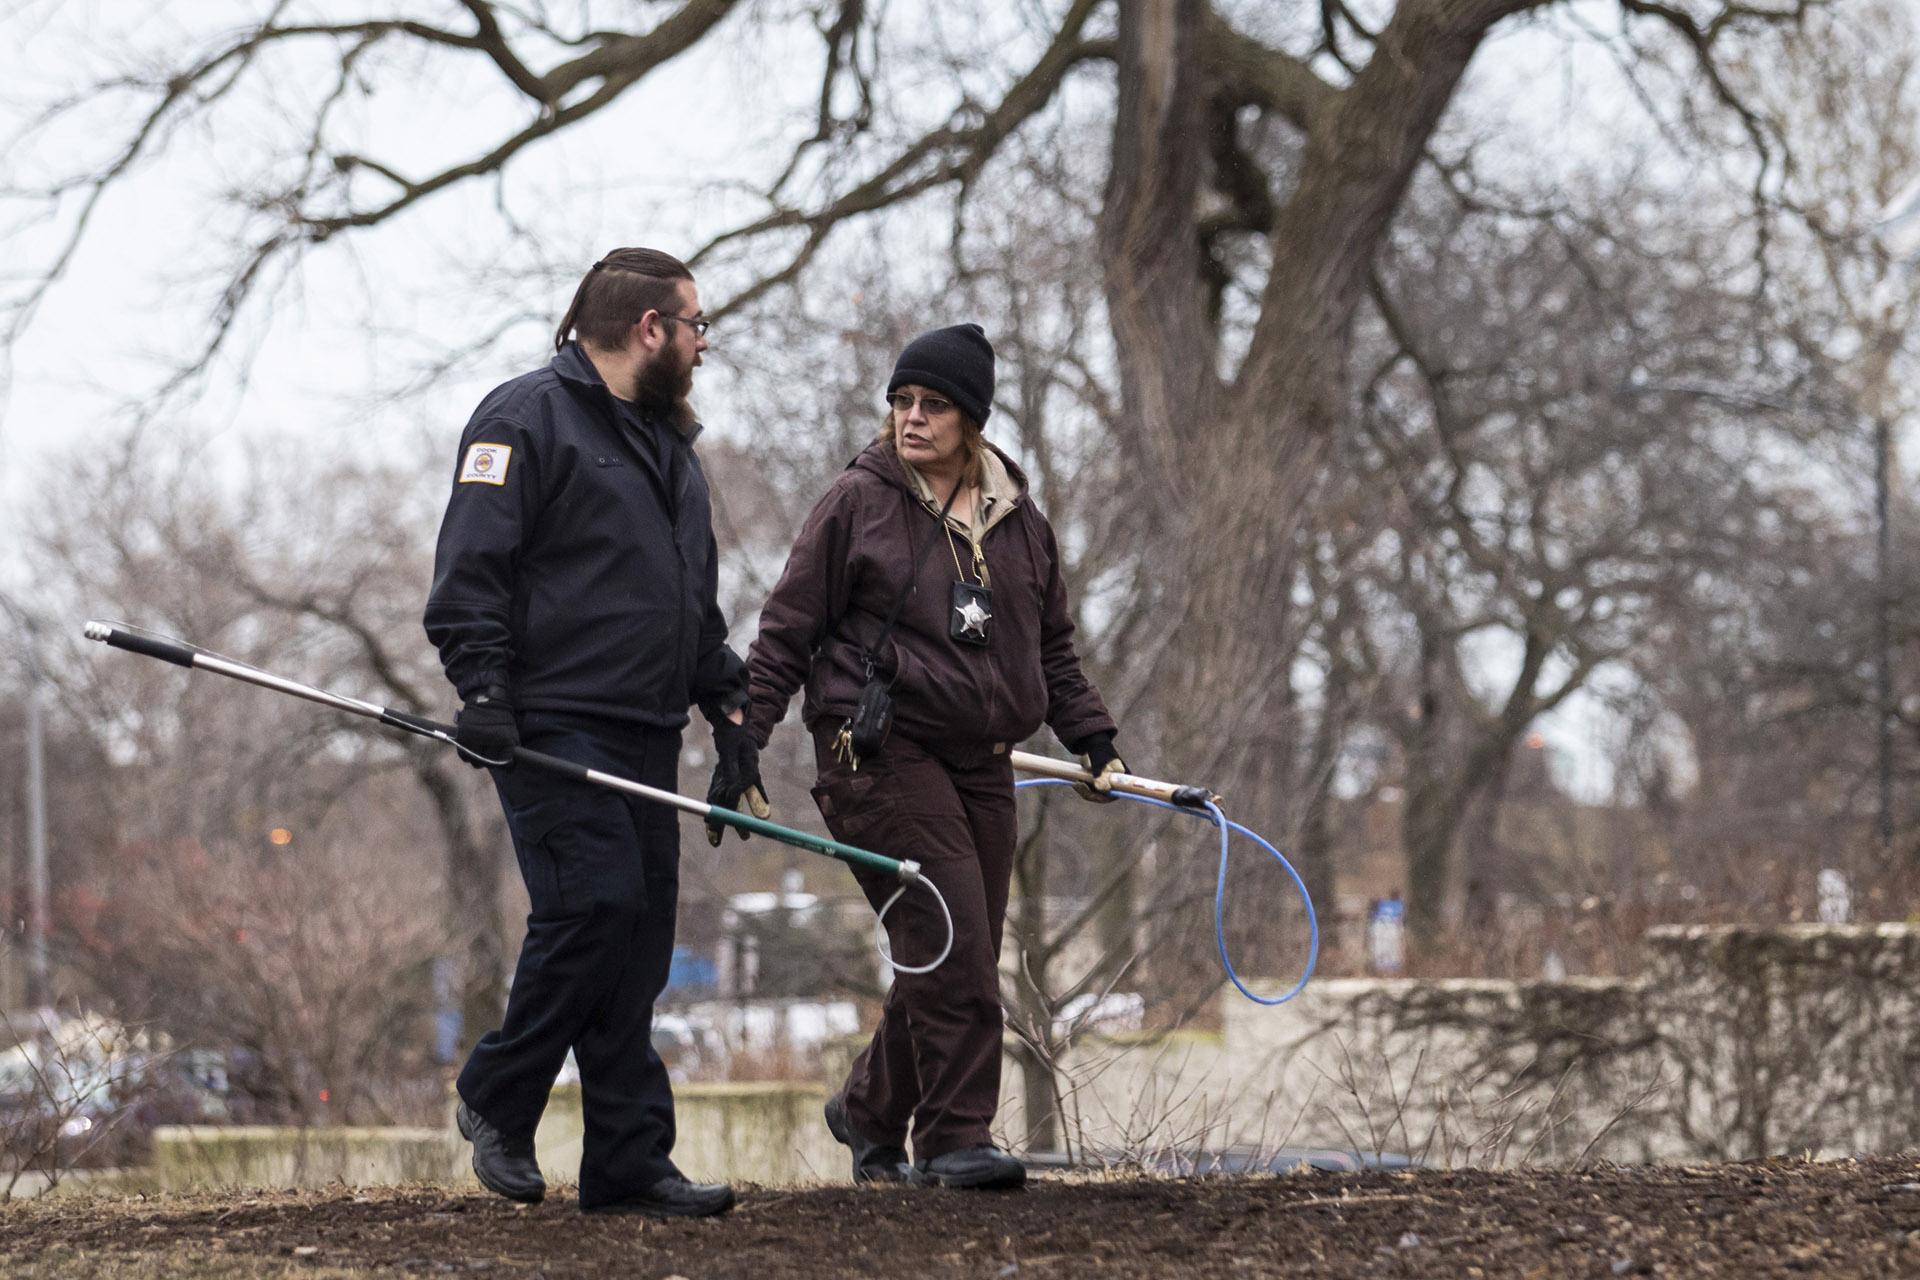 A Chicago Animal Care and Control inspector, right, and a warden from Cook County Animal Control fan out around the Peggy Notebaert Nature Museum in Lincoln Park to look for a possible coyote den, Thursday morning, Jan. 9, 2020. (Ashlee Rezin Garcia / Chicago Sun-Times via AP)